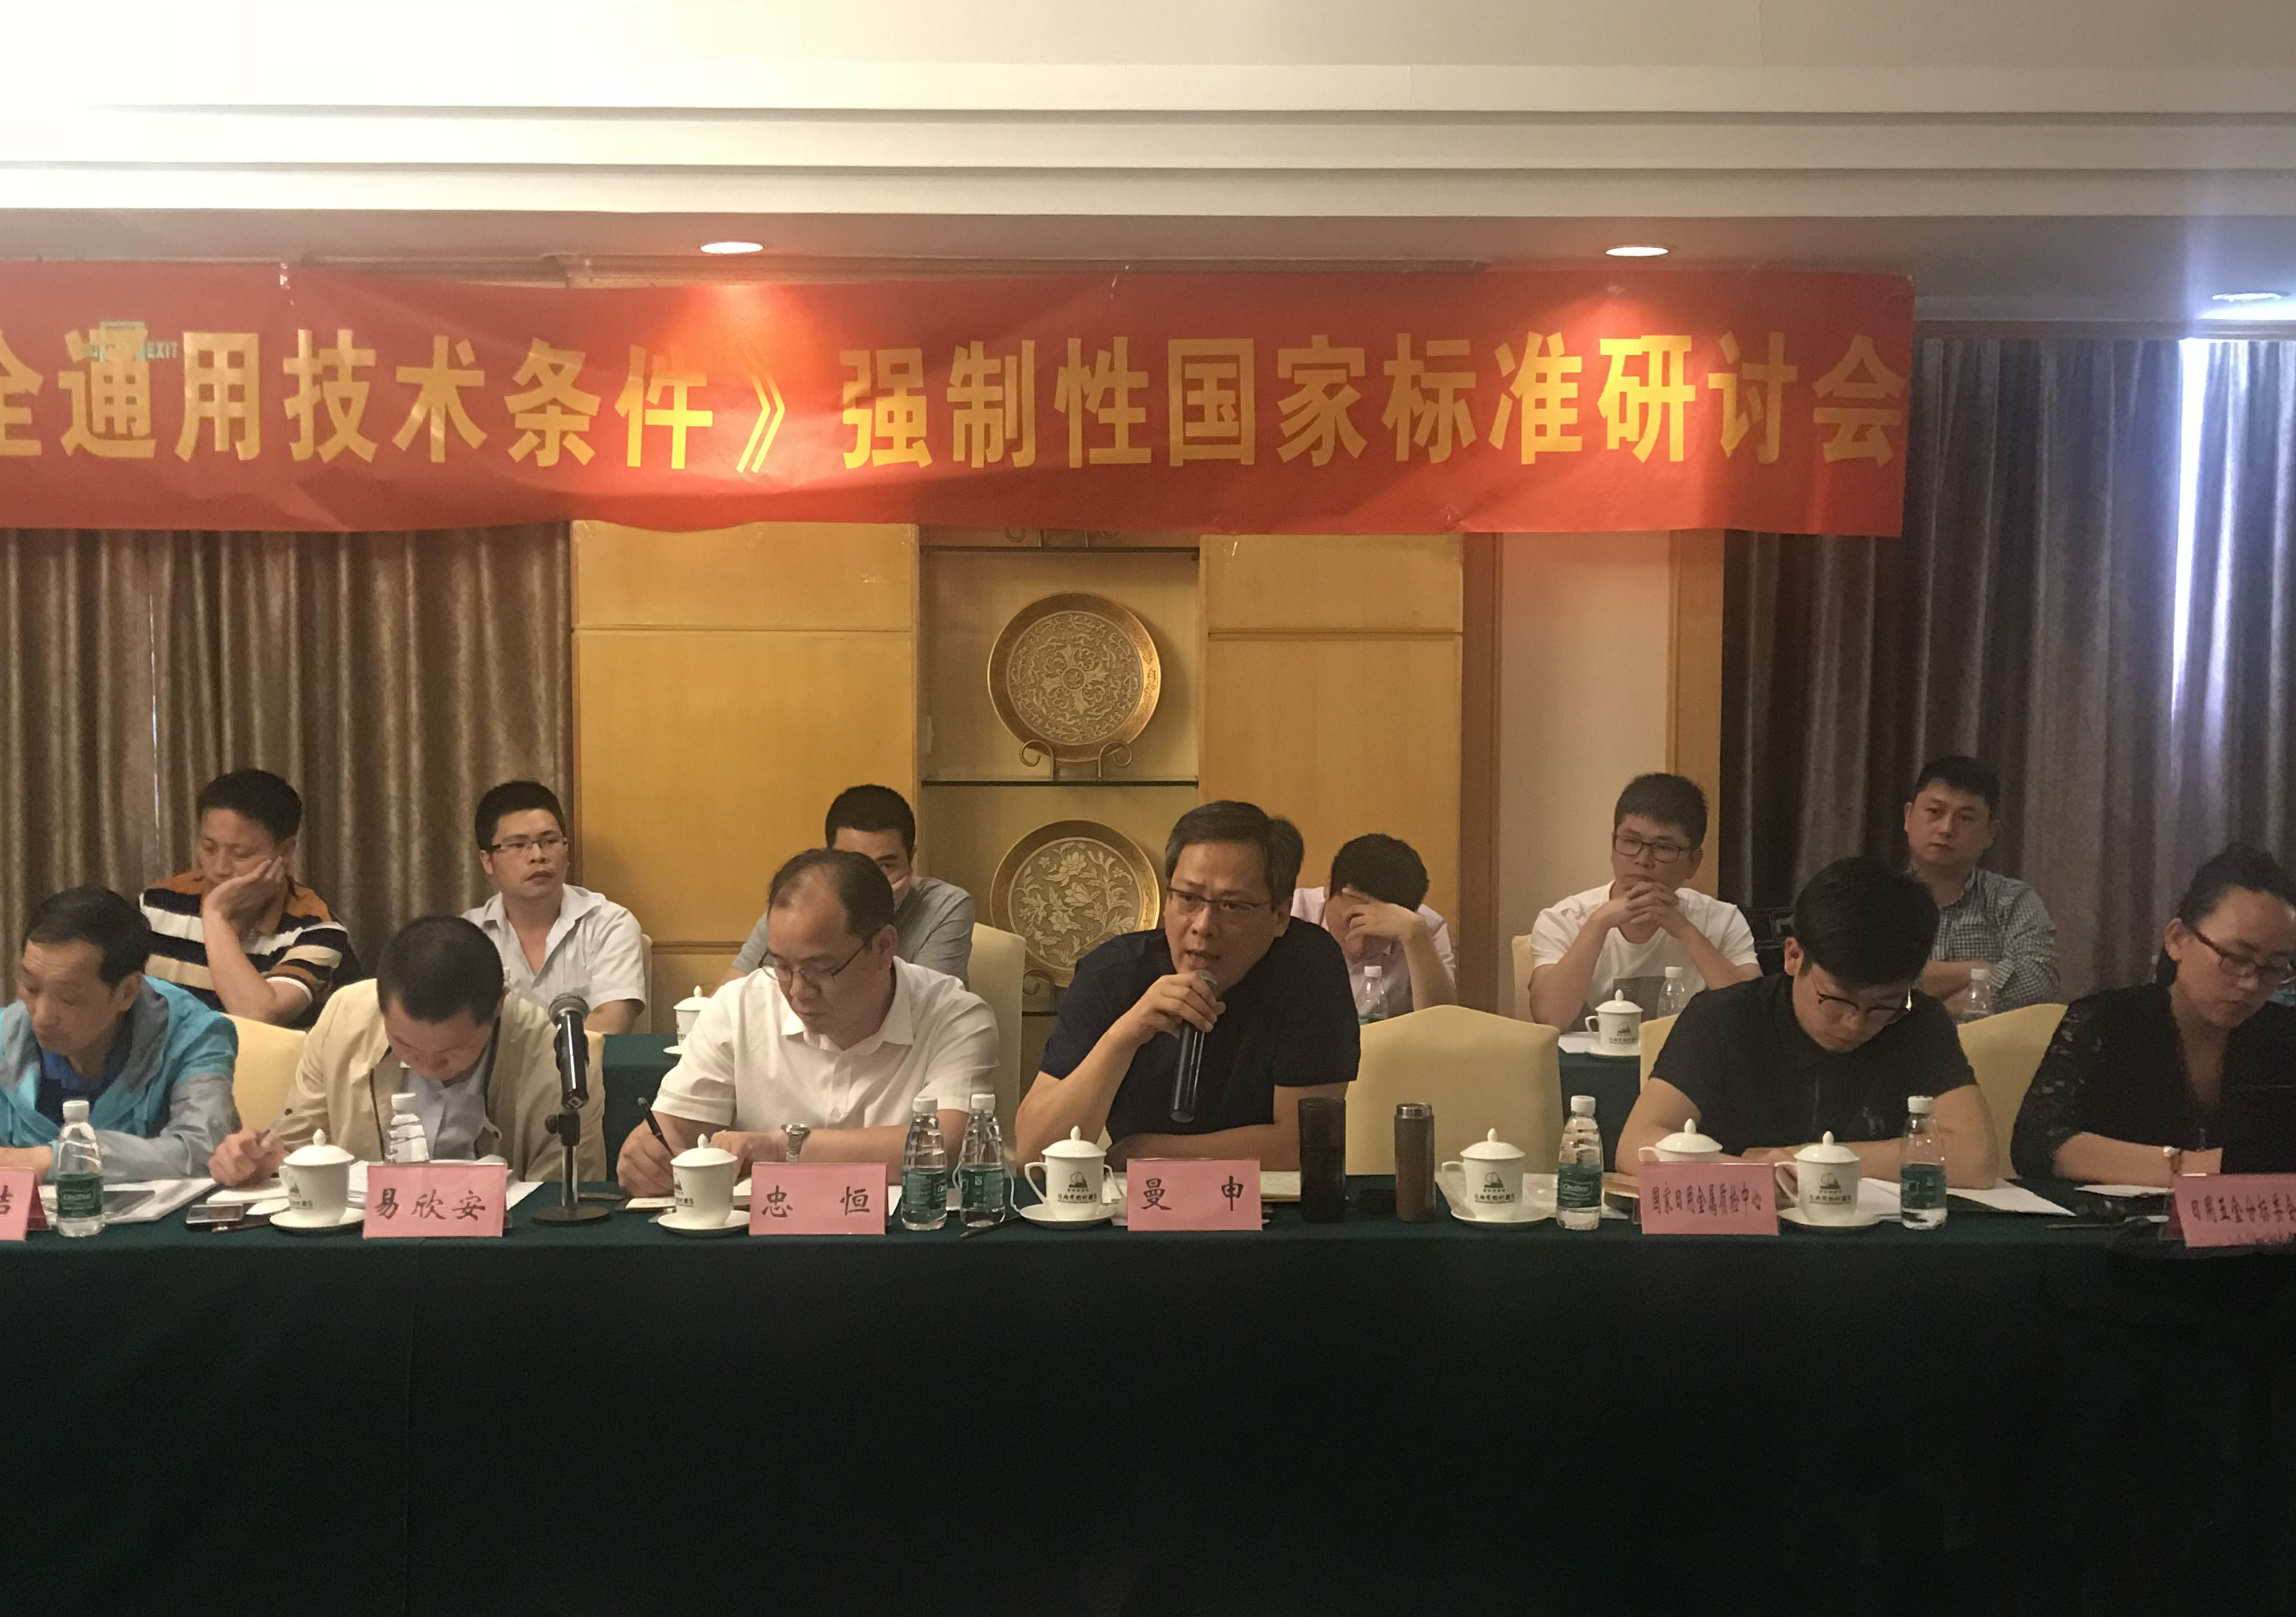 Smart lock industry standard comes! The "National General Requirements for Locks Safety" National Standards Revision Seminar was Held